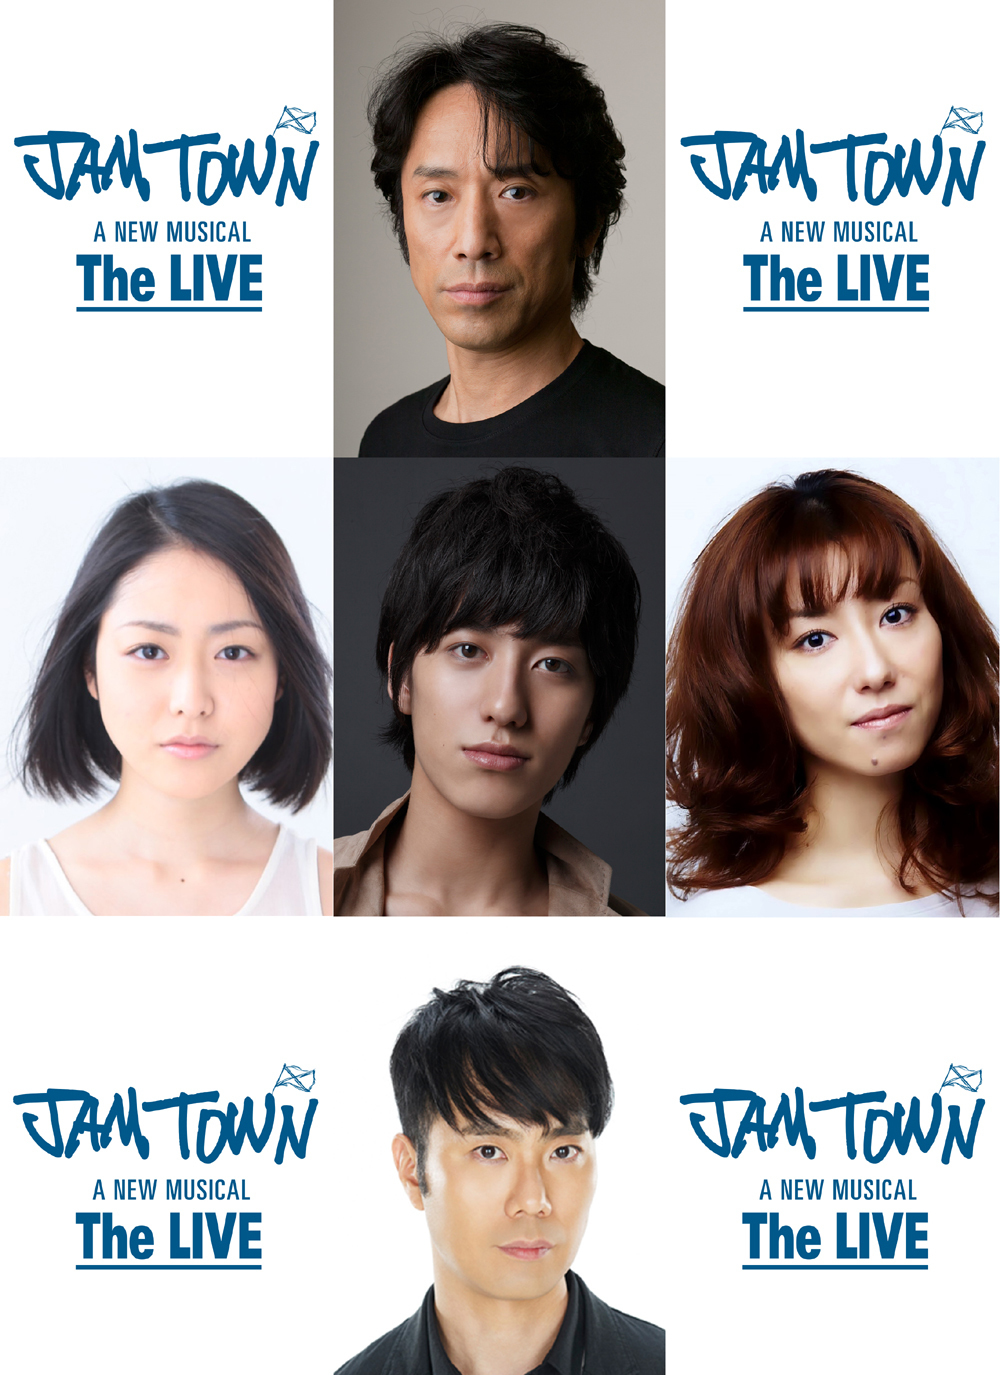 A NEW MUSICAL「JAM TOWN」The LIVE